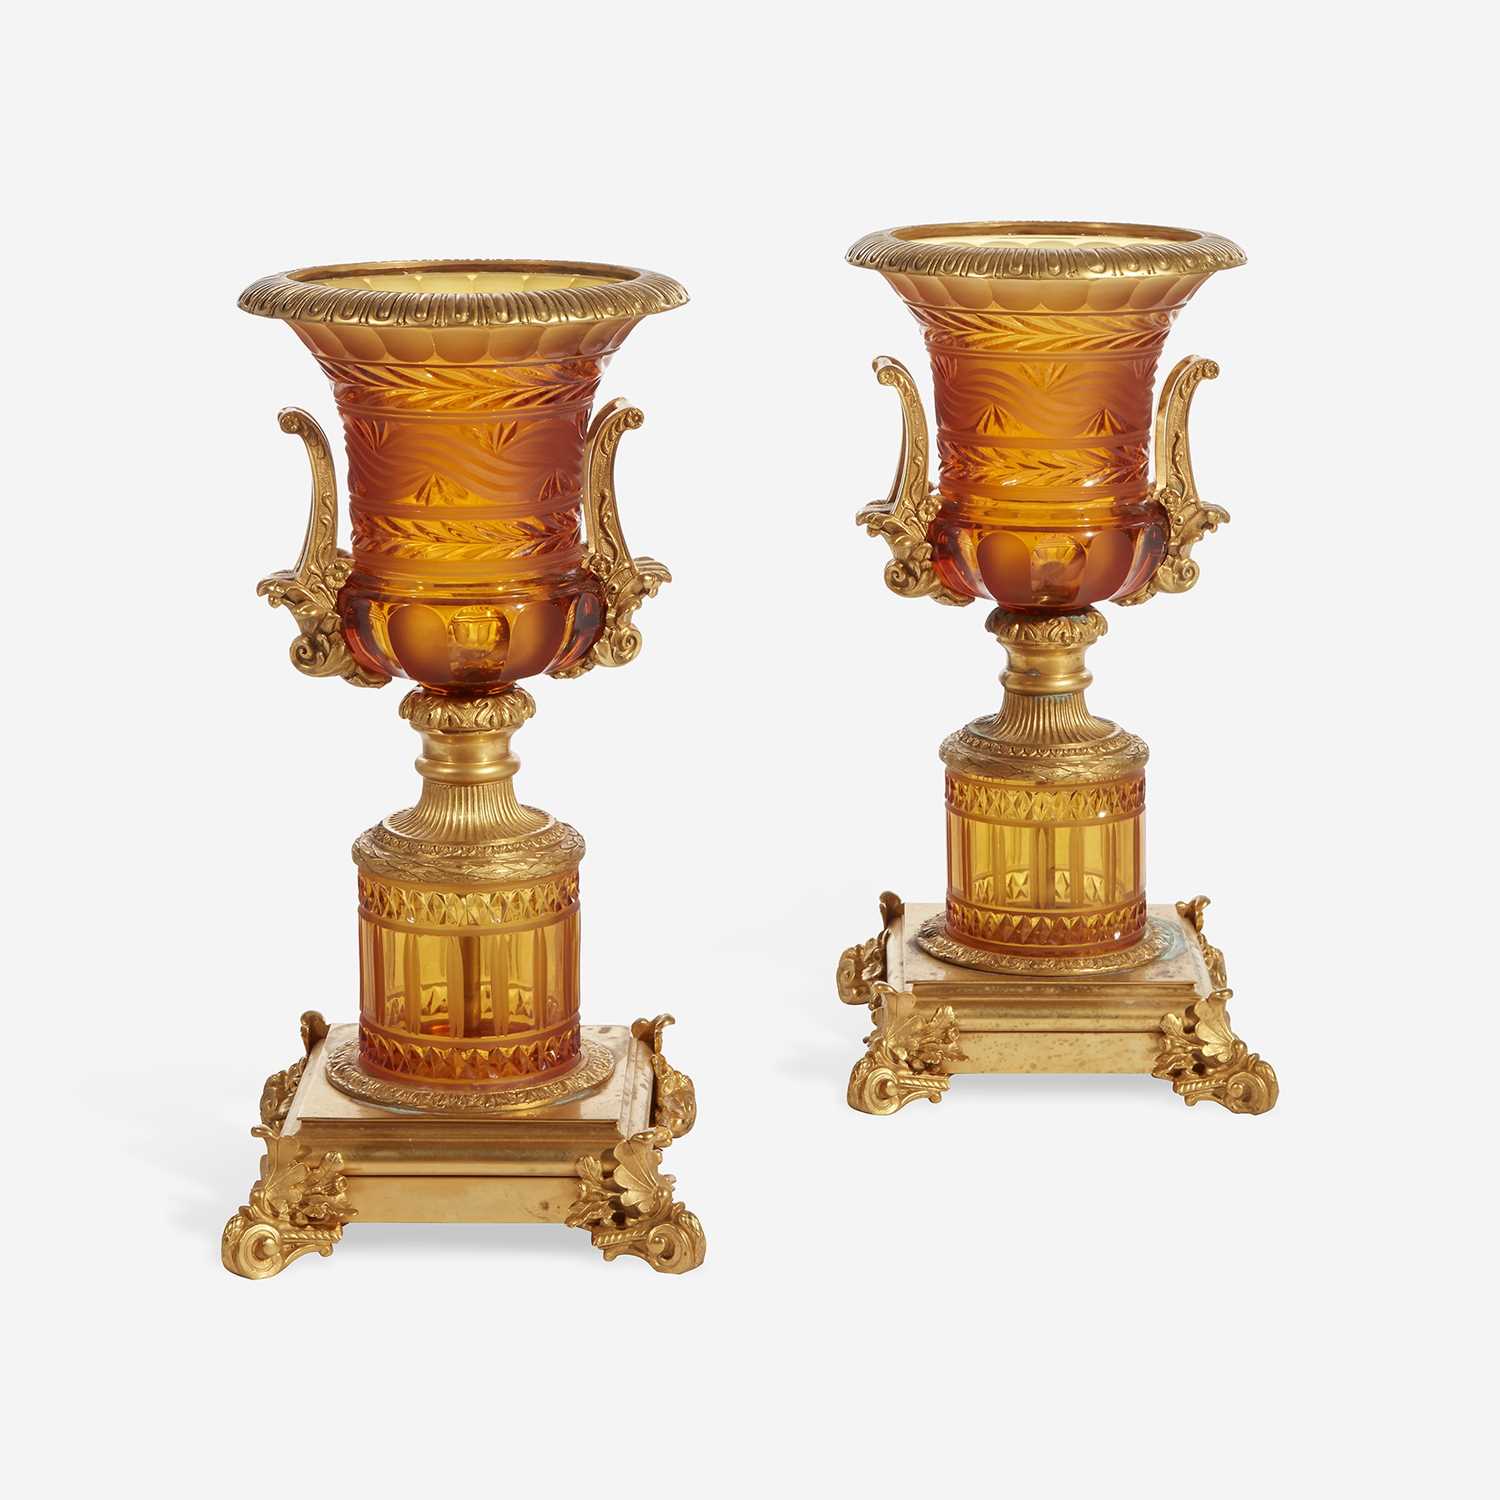 Lot 58 - A Pair of French Gilt-Bronze Mounted Cut-Glass Urns